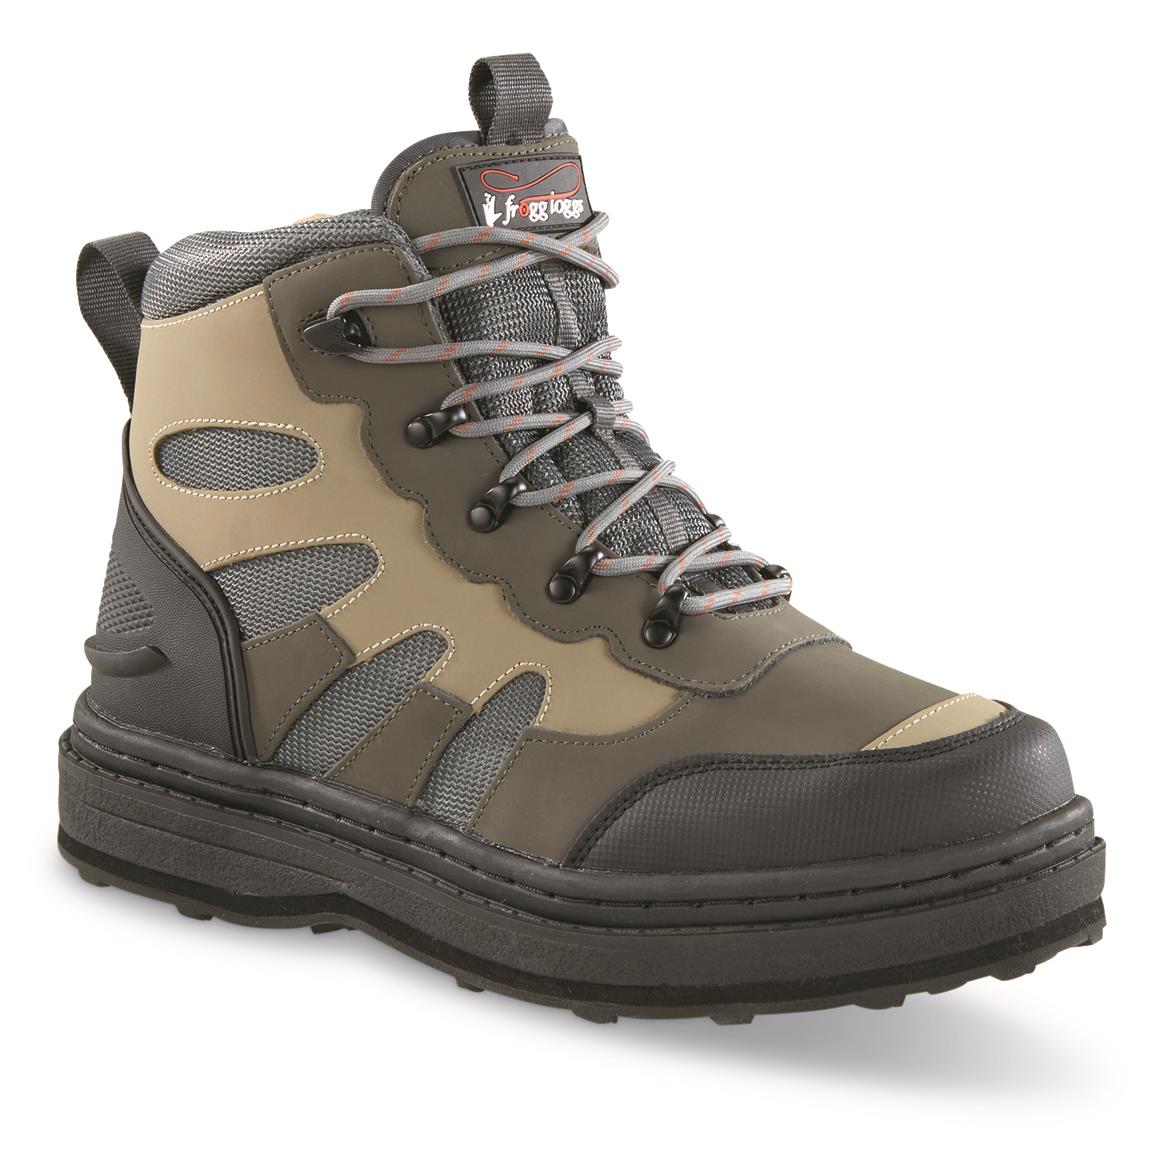 frogg toggs Pilot II Wading Boots, Rubber Sole, Cleated, Khaki/black